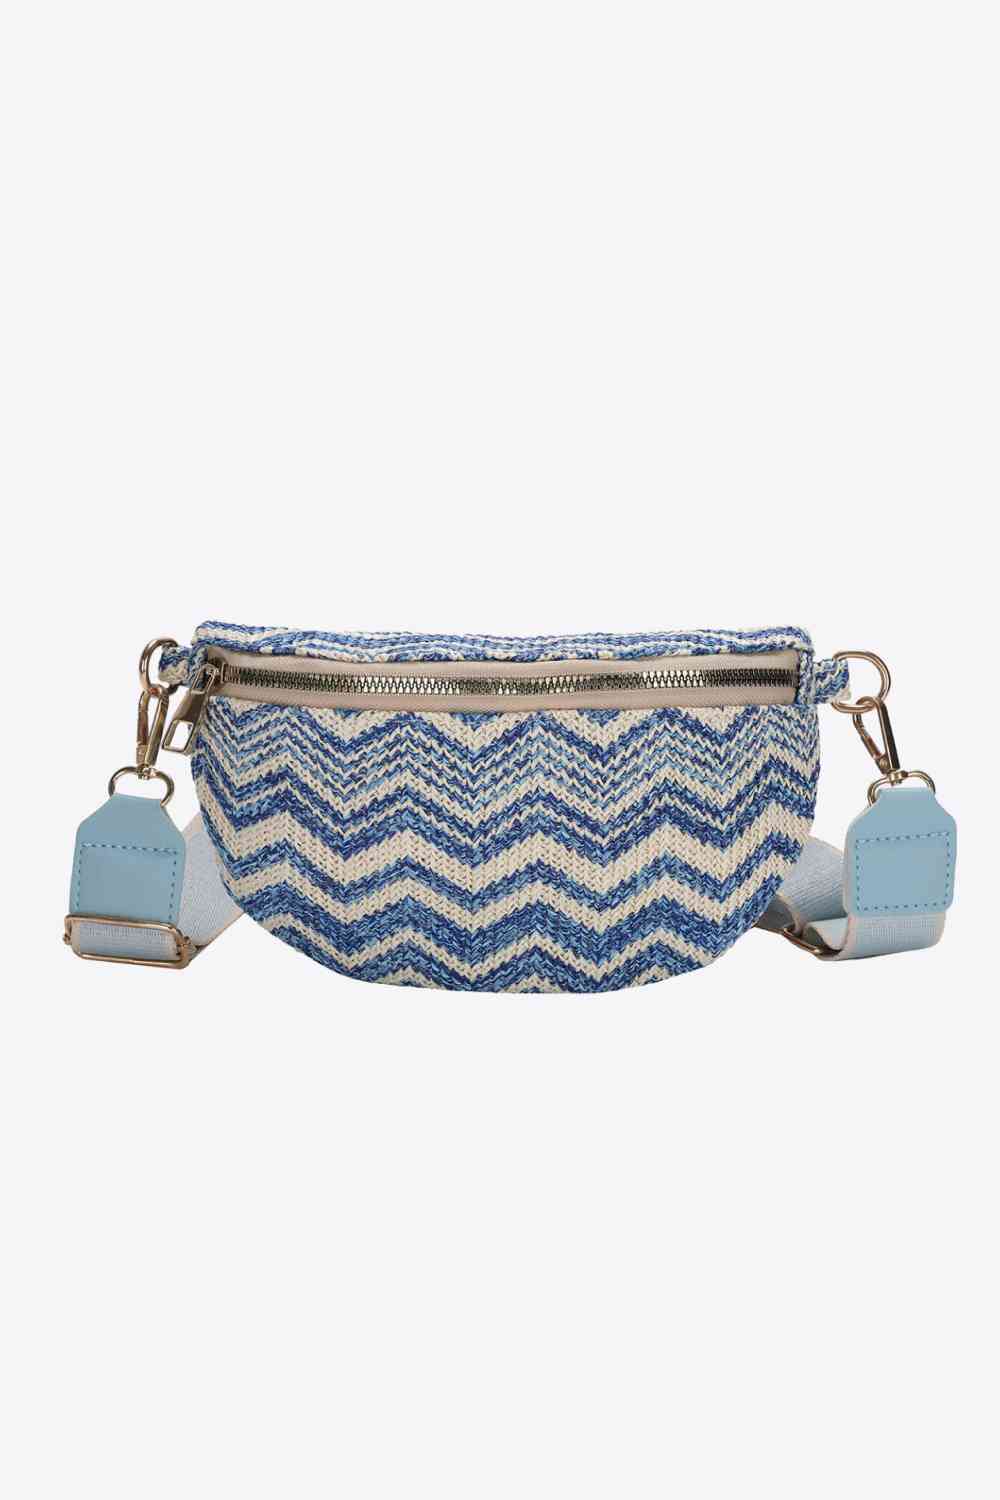 Cupid Beauty Supplies Cupid Beauty Supplies Pastel Blue / One Size Women Sling Bag Chic Mini Chevron Straw Sling Bag - Striped Style, Elegance